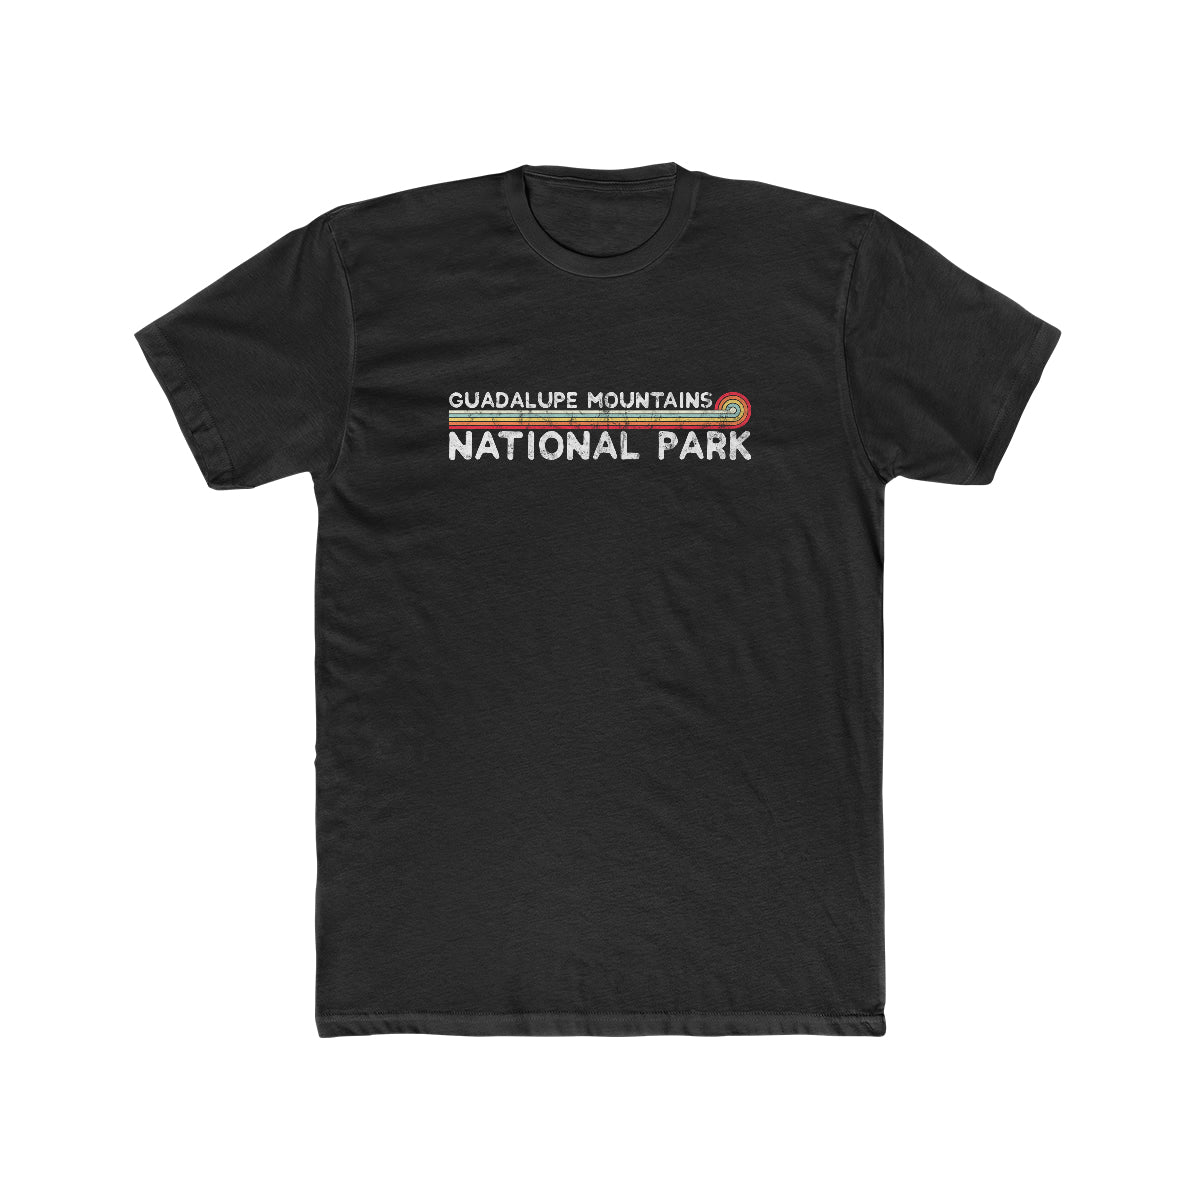 Guadalupe Mountains National Park T-Shirt - Vintage Stretched Sunrise